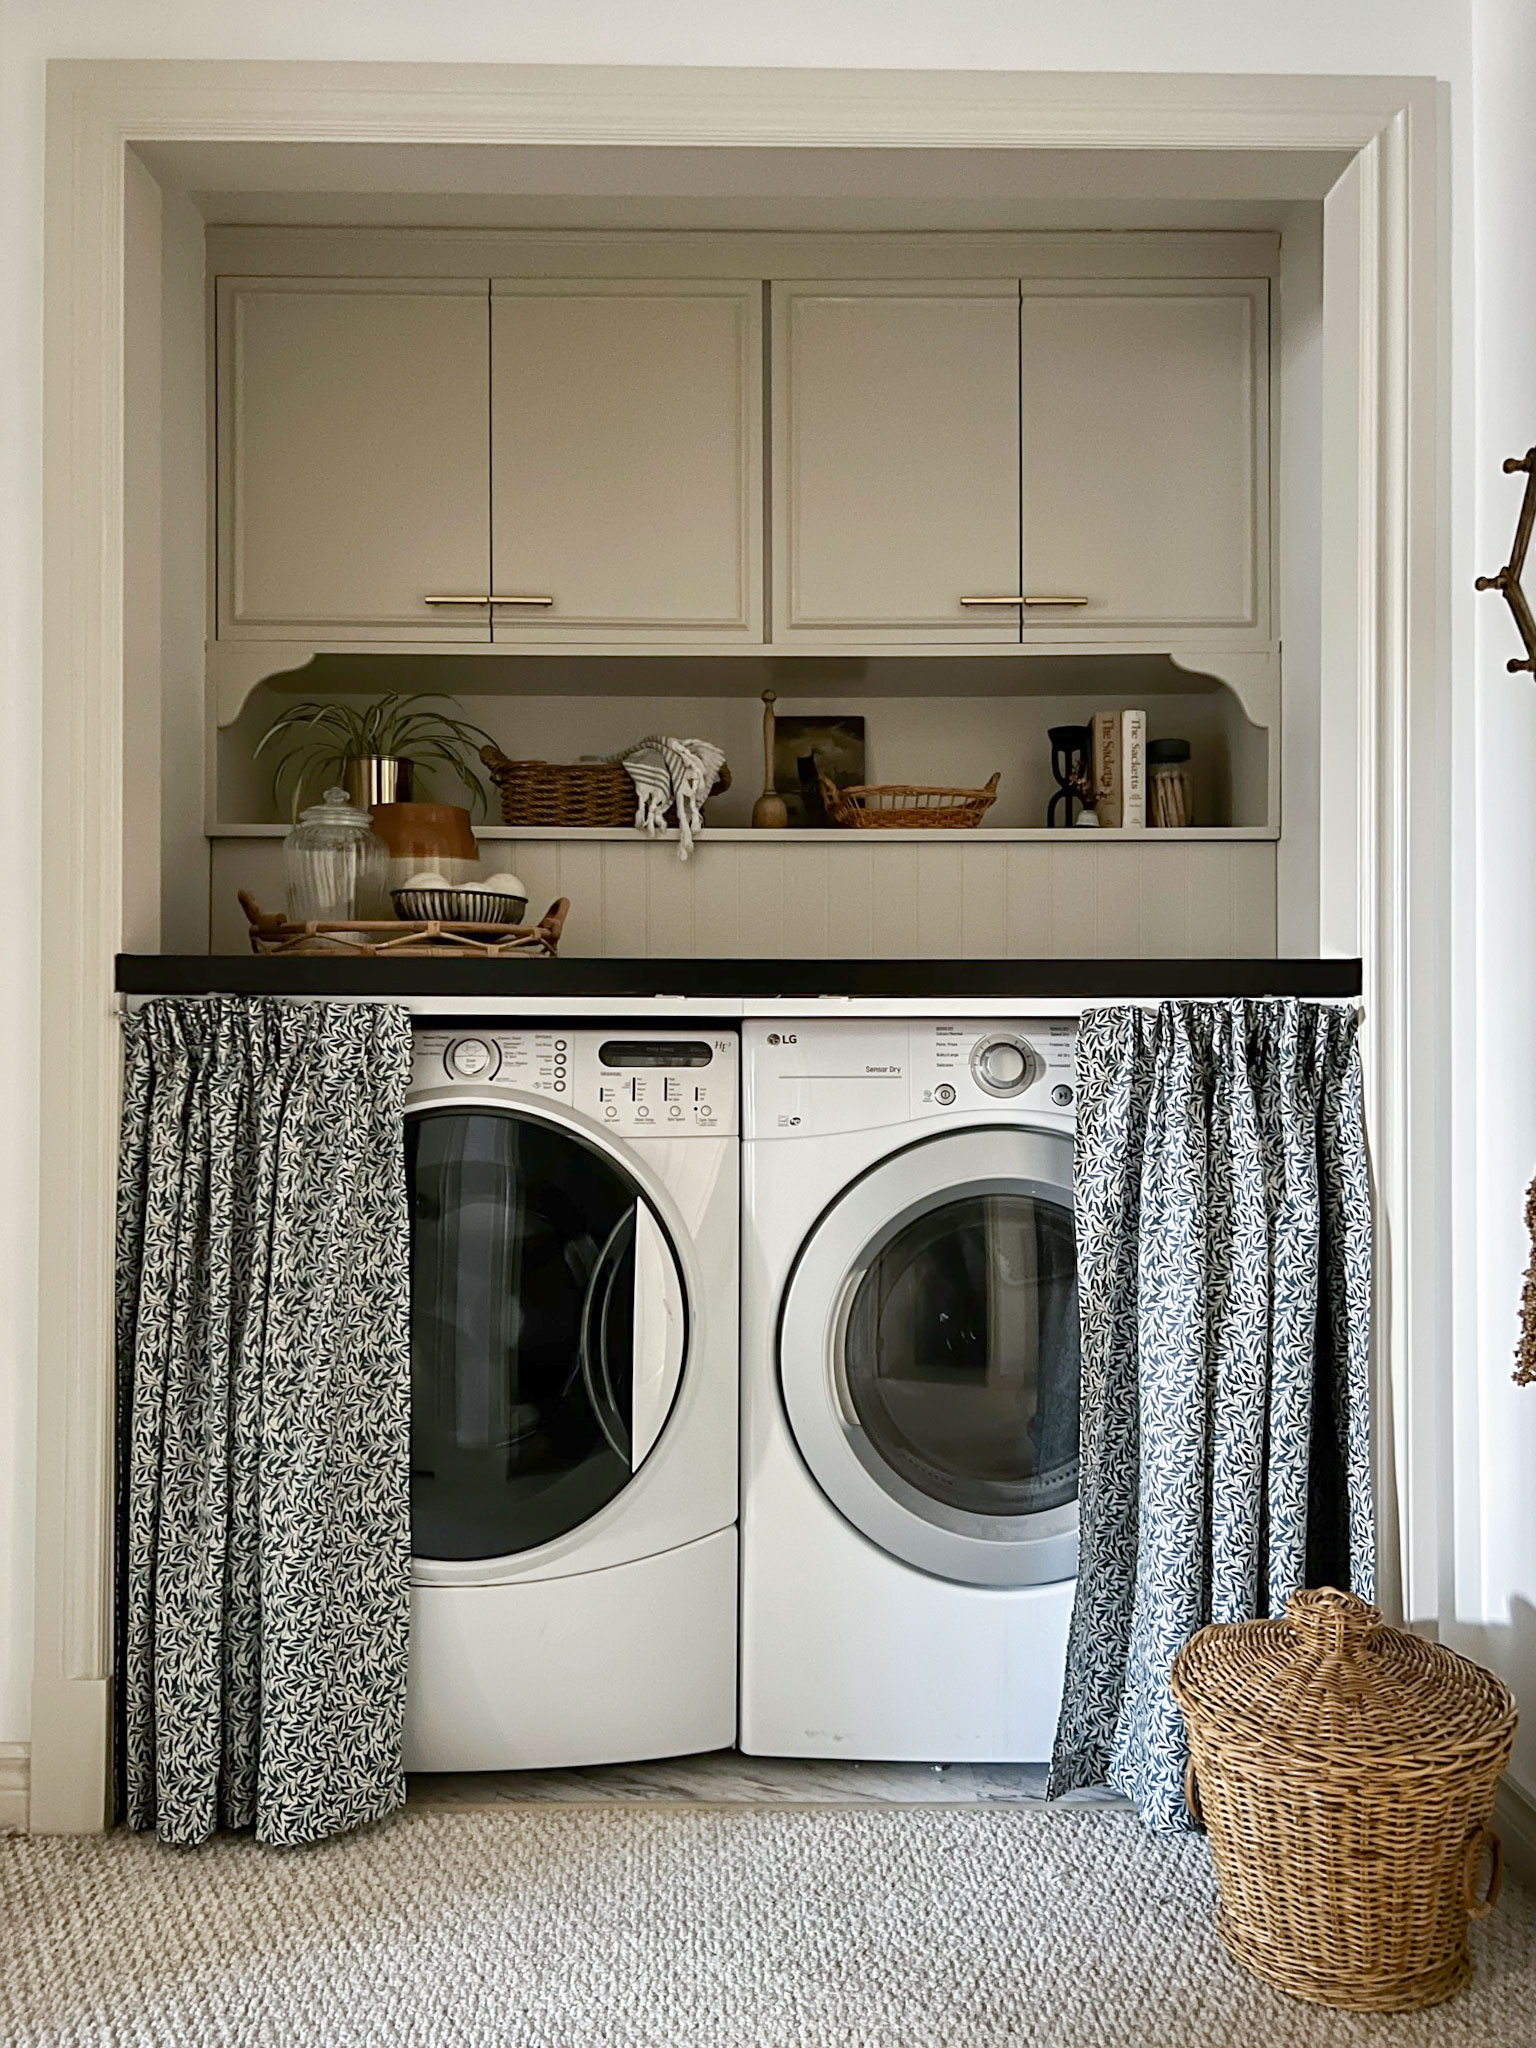 laundry closet, skirted countertsop with curtains open. Cabinets above with an open shlef, edgecomb grey